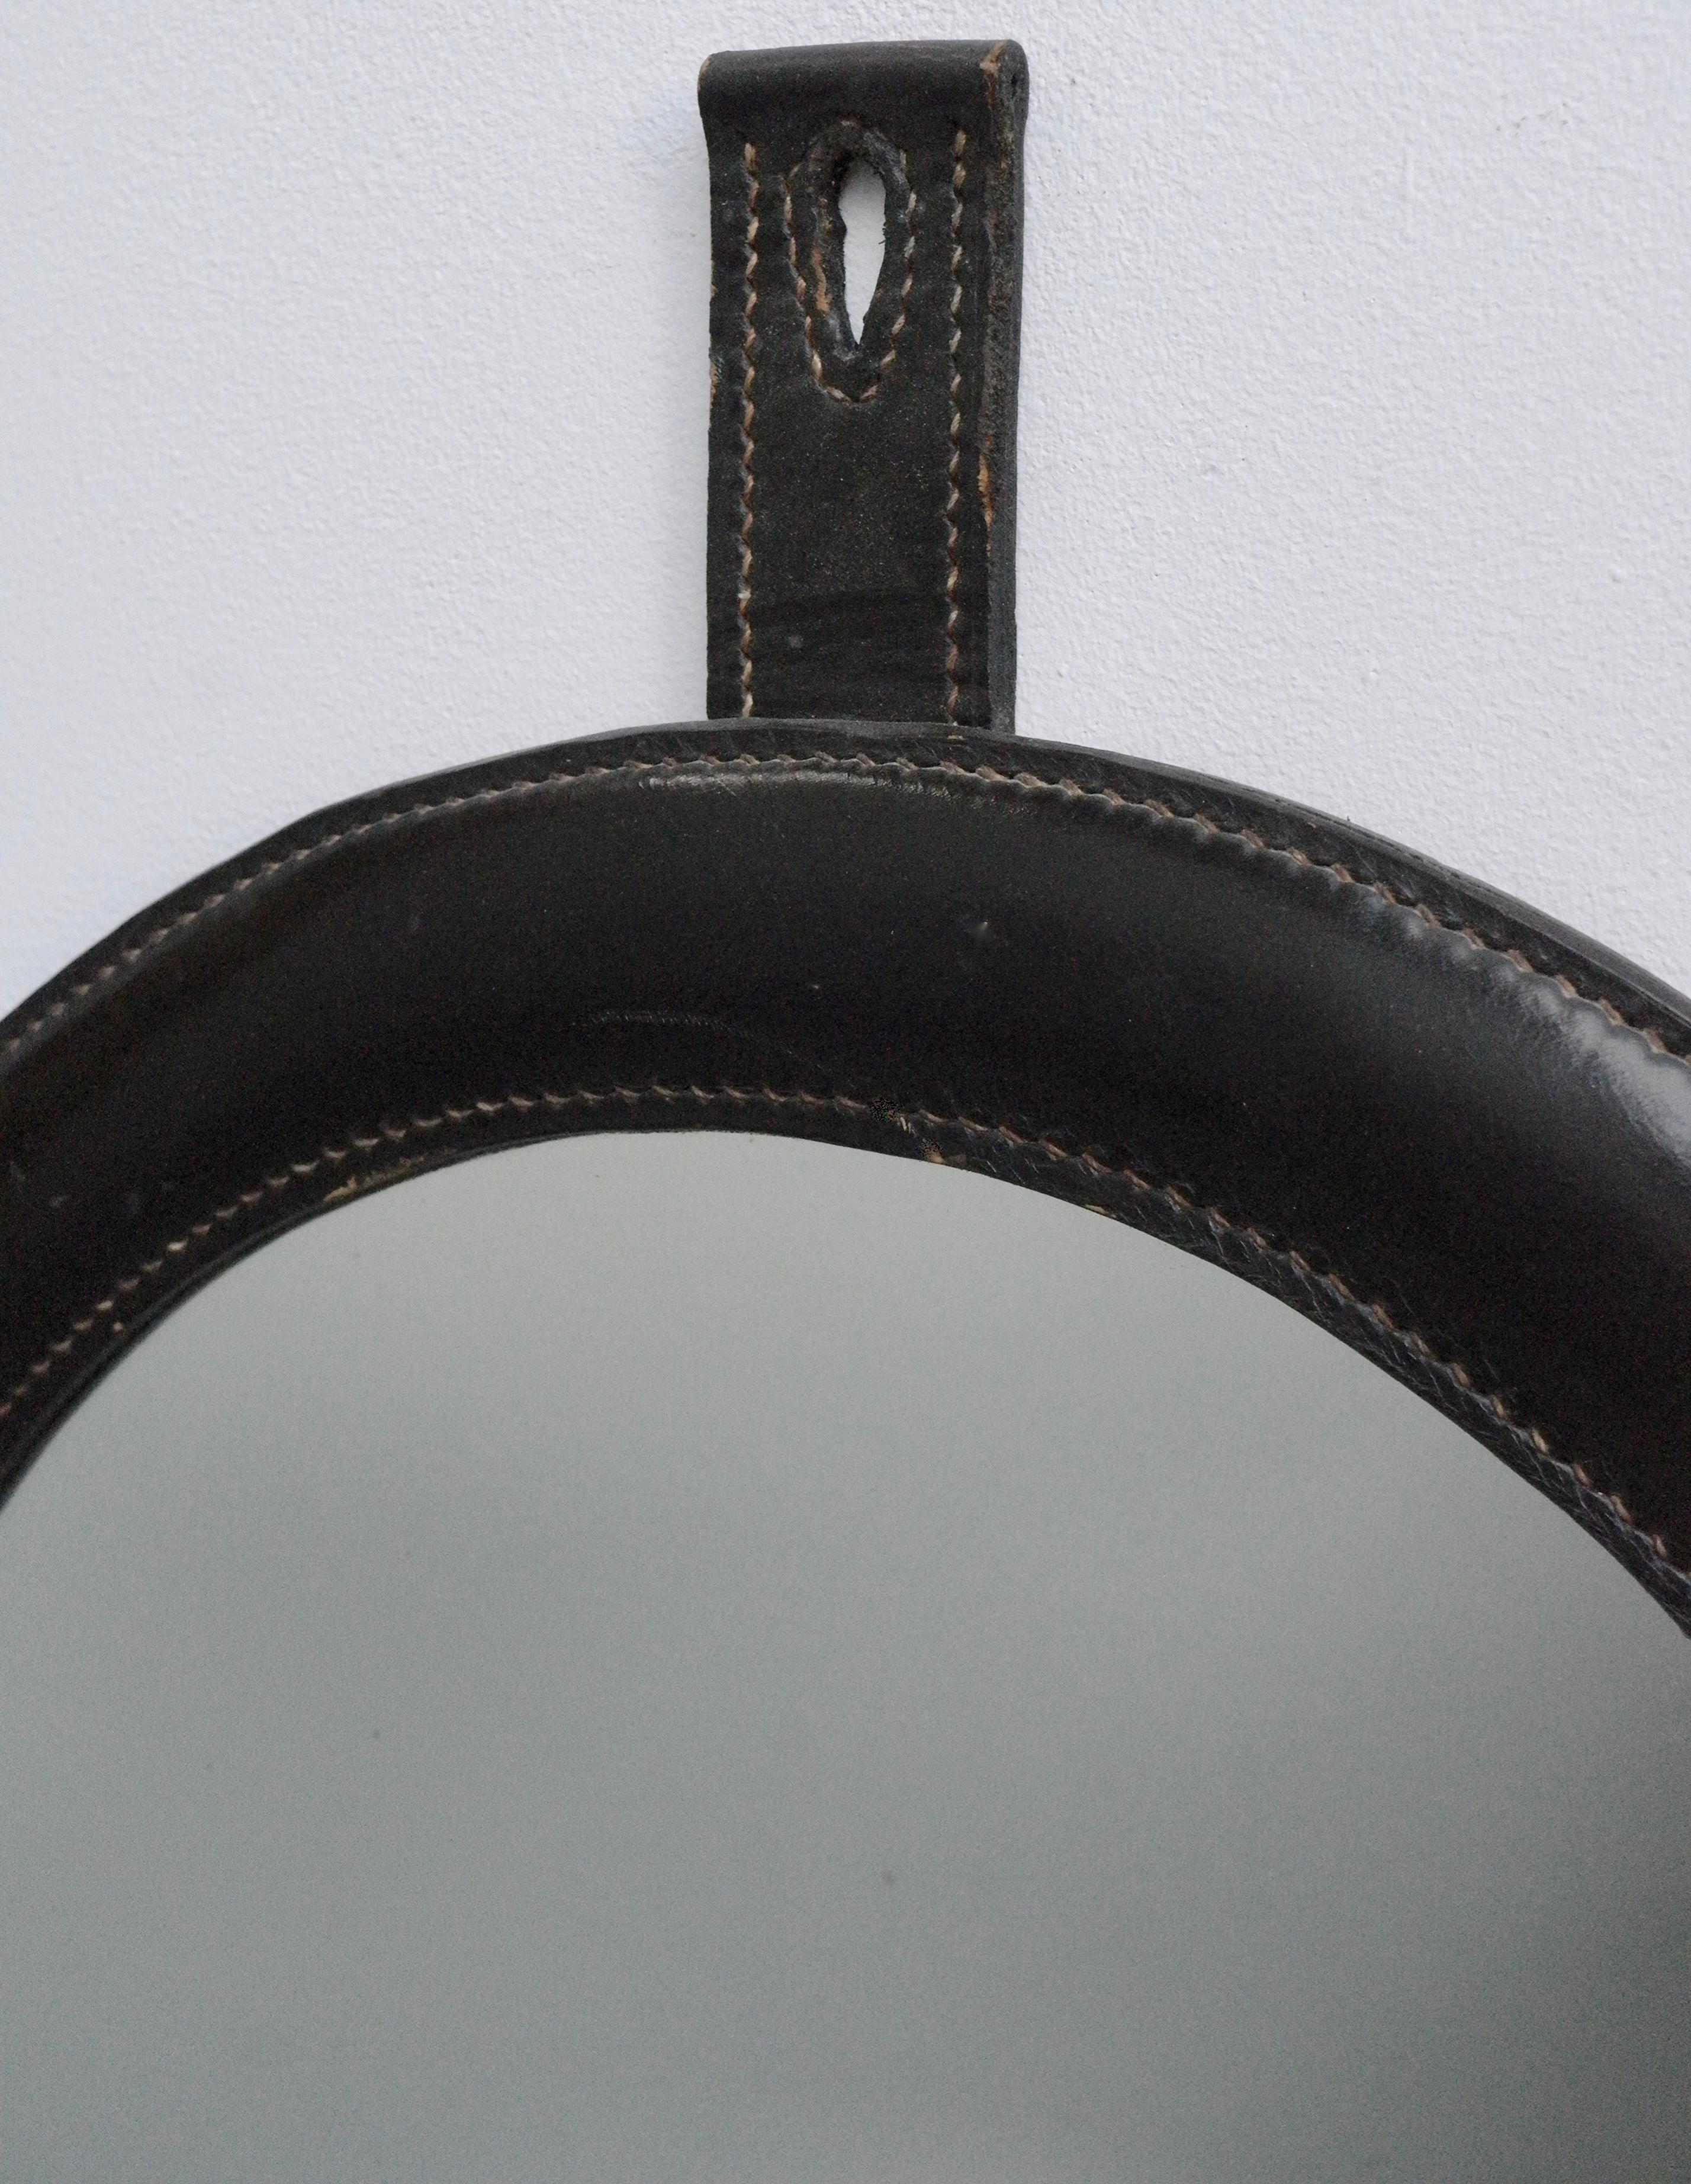 handstitched black leather wall mirror in style of Jacques Adnet.